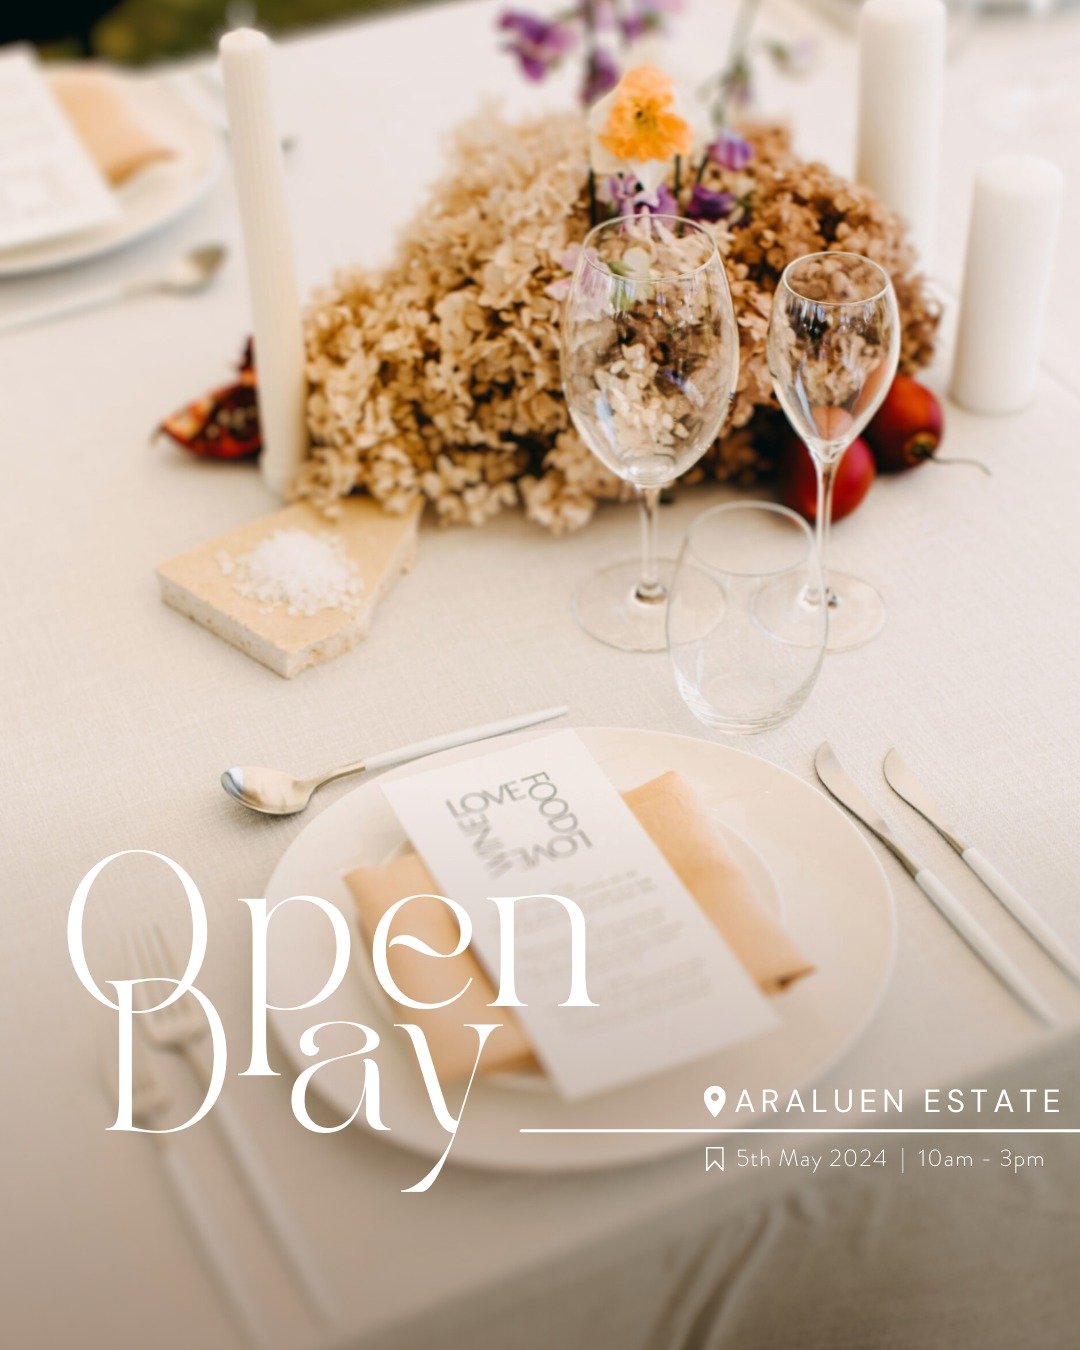 SAVE THE DATE - Araluen Estate Wedding Open Day - 05/05/24 ✨

If you're dreaming of having your big day in the Perth Hills, well, you're in luck! Get all the inspiration and essential information you need for planning your wedding. Visit us on the 5t